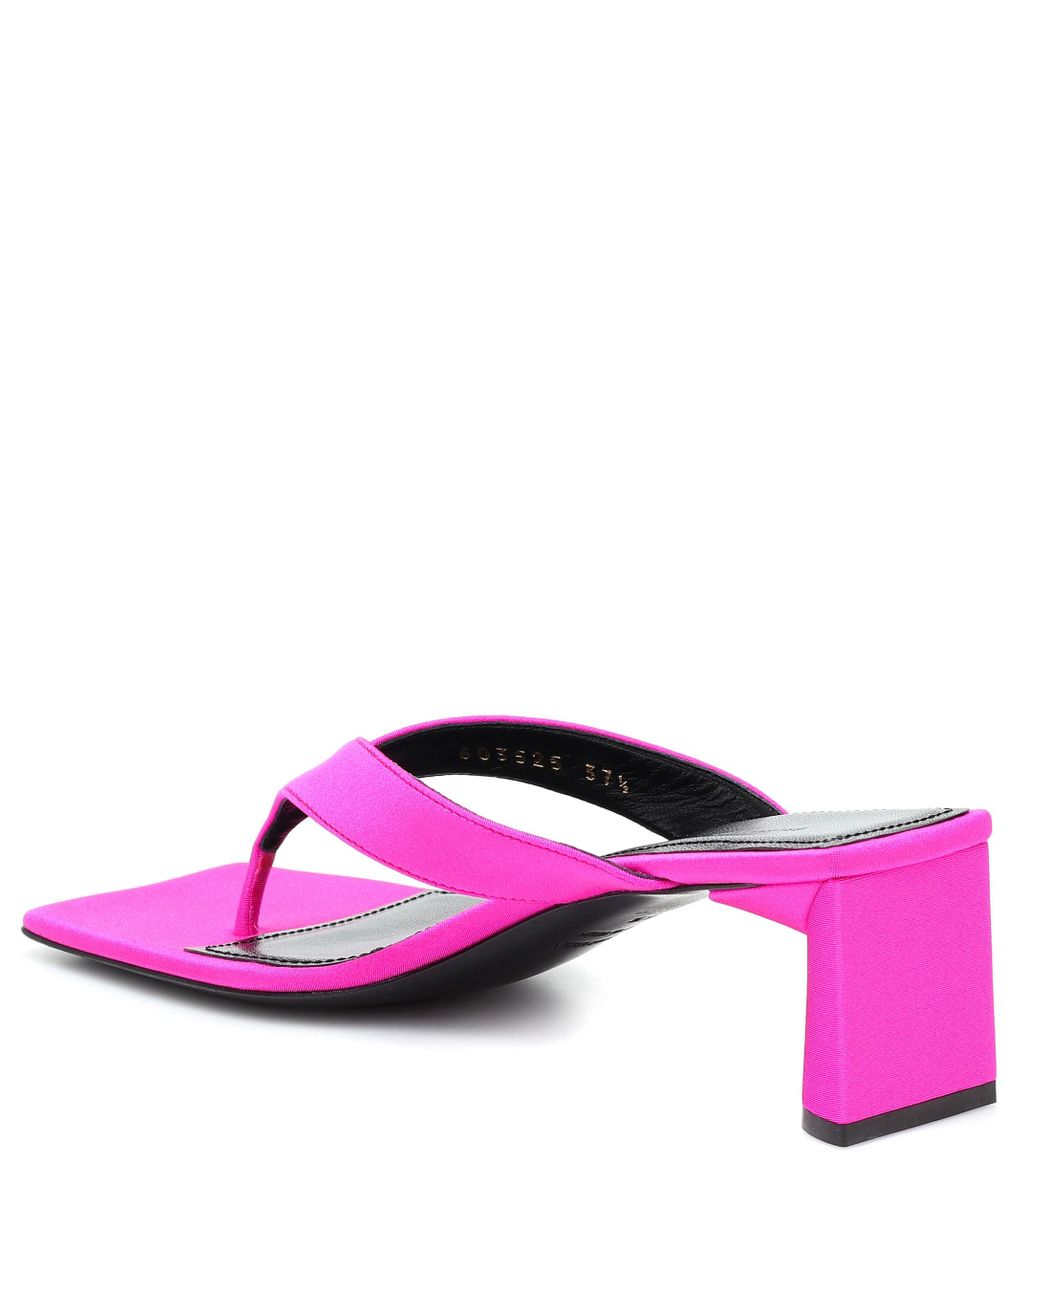 Balenciaga Synthetic Double Square 60mm Open Back Sandal in Pink | Lyst